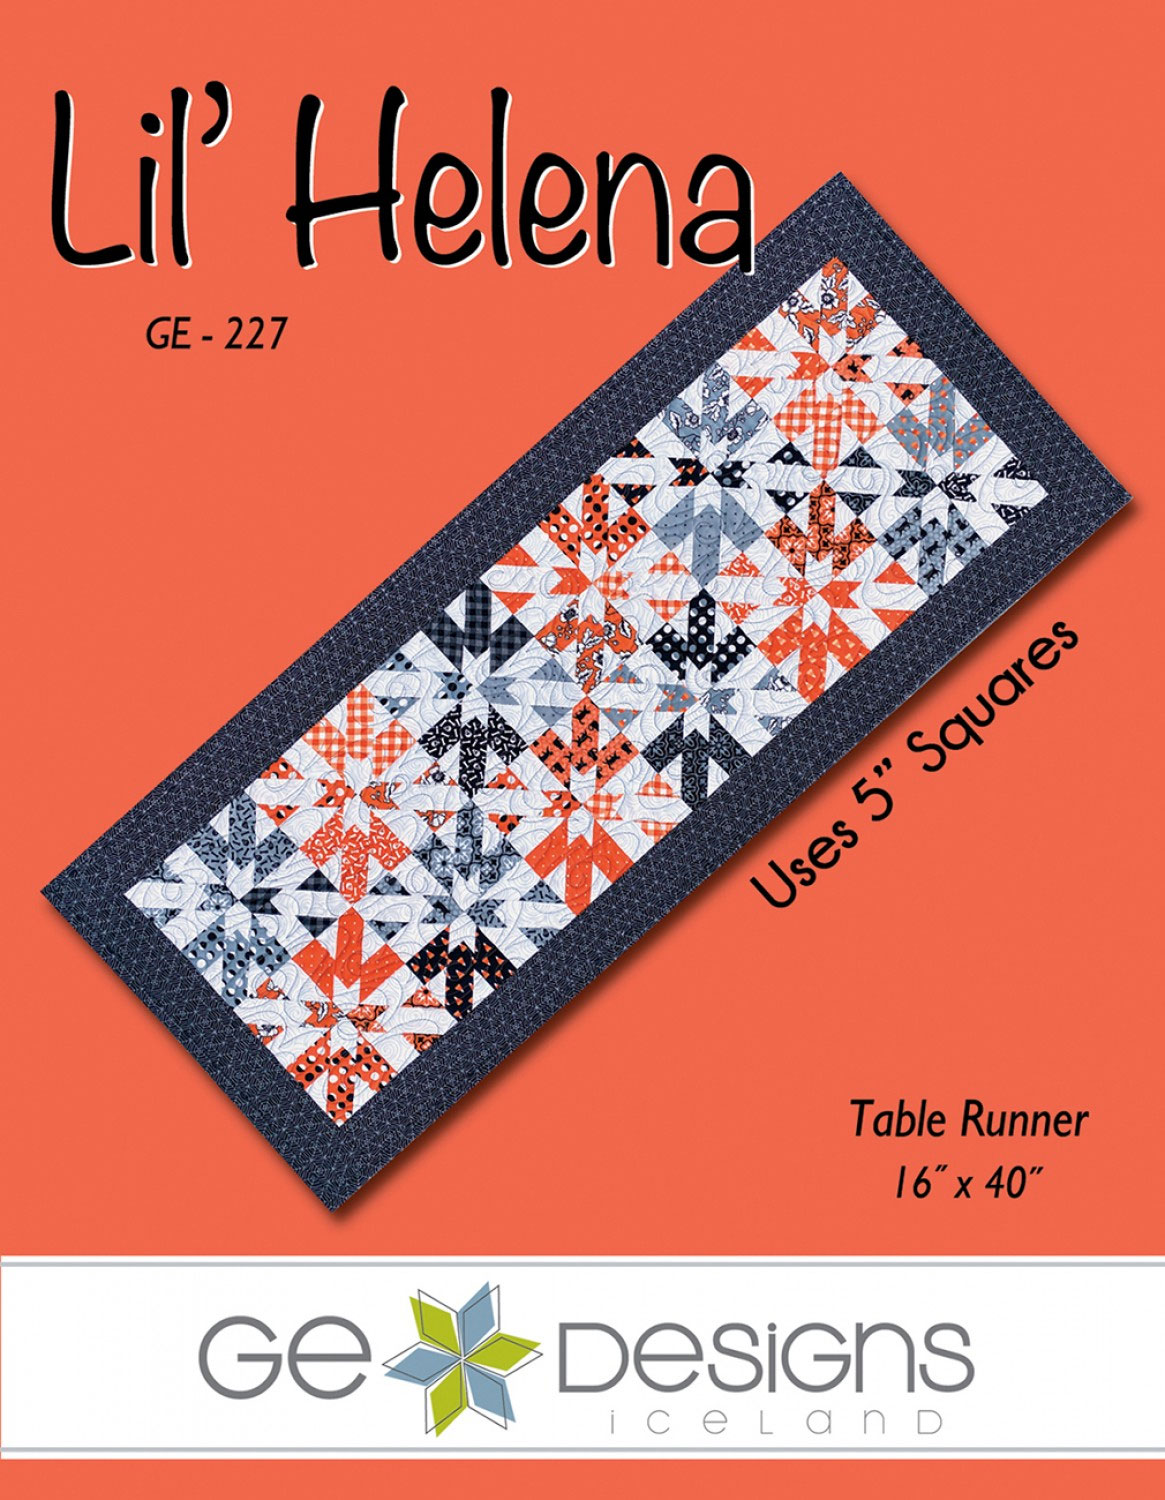 Lil-Helena-table-runnert-sewing-pattern-GE-Designs-front